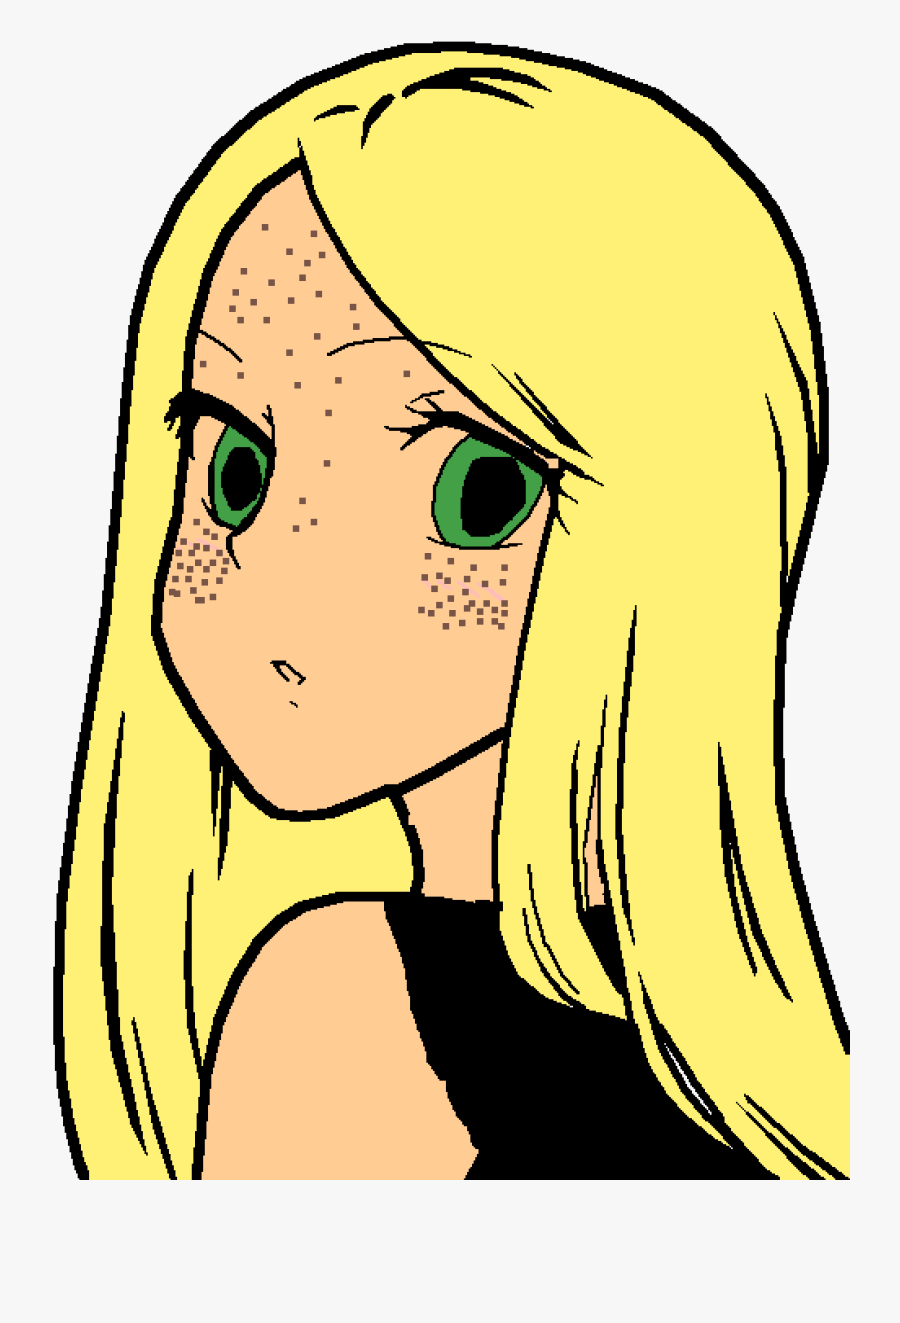 Cute Drawings Of Girls, Transparent Clipart